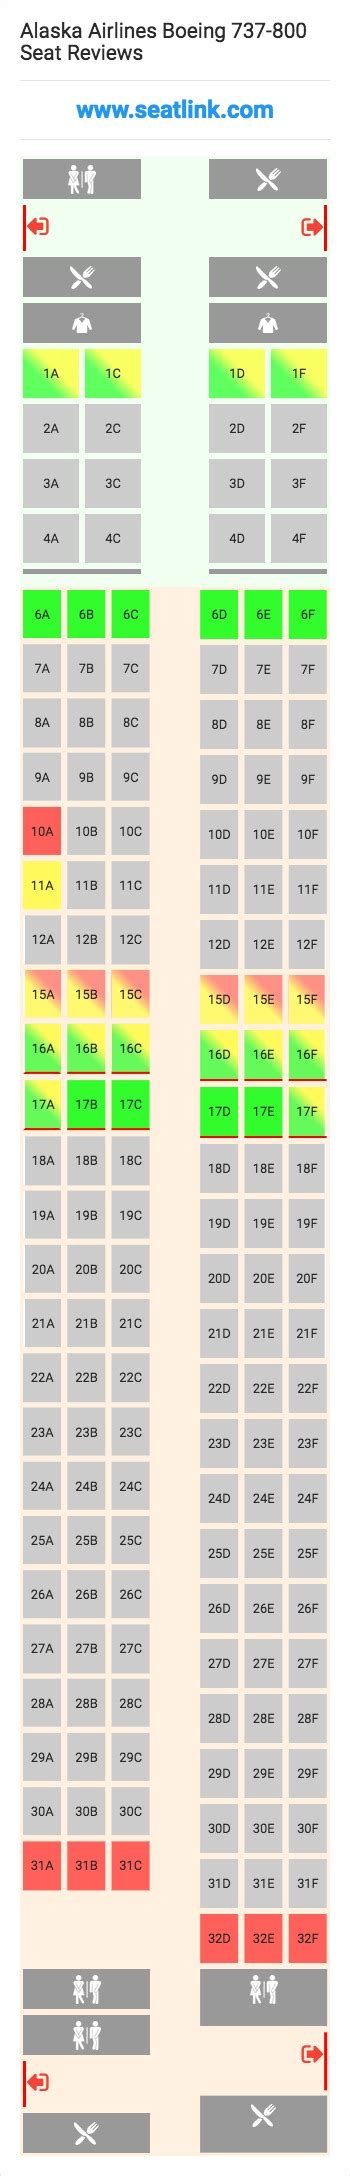 United Boeing 737 700 Seat Map